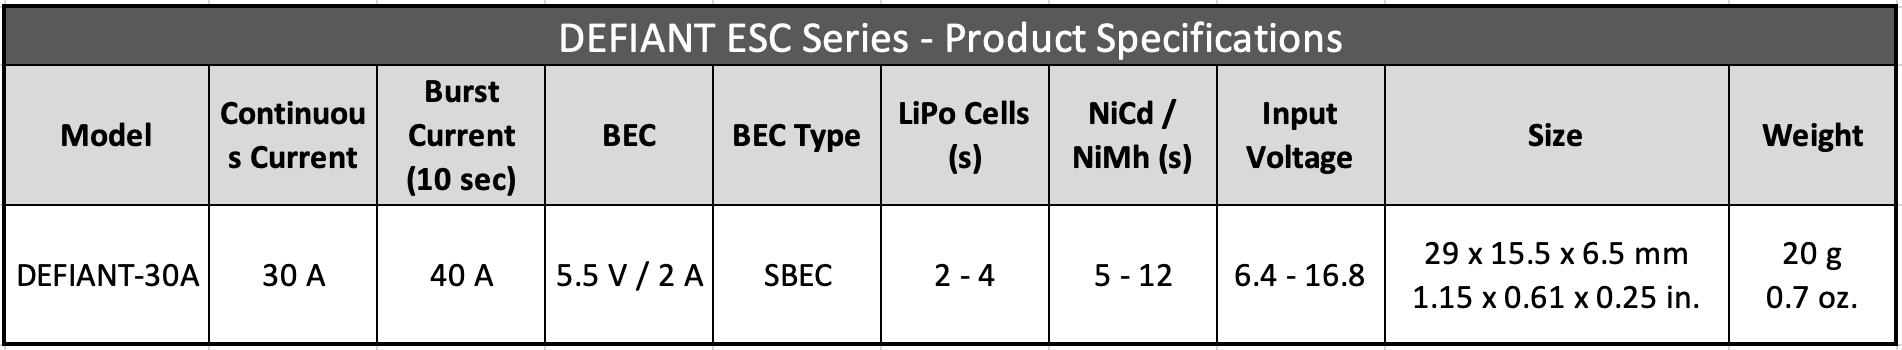 DEFIANT ESC Series - Product Specifications Table with weight and dimensions